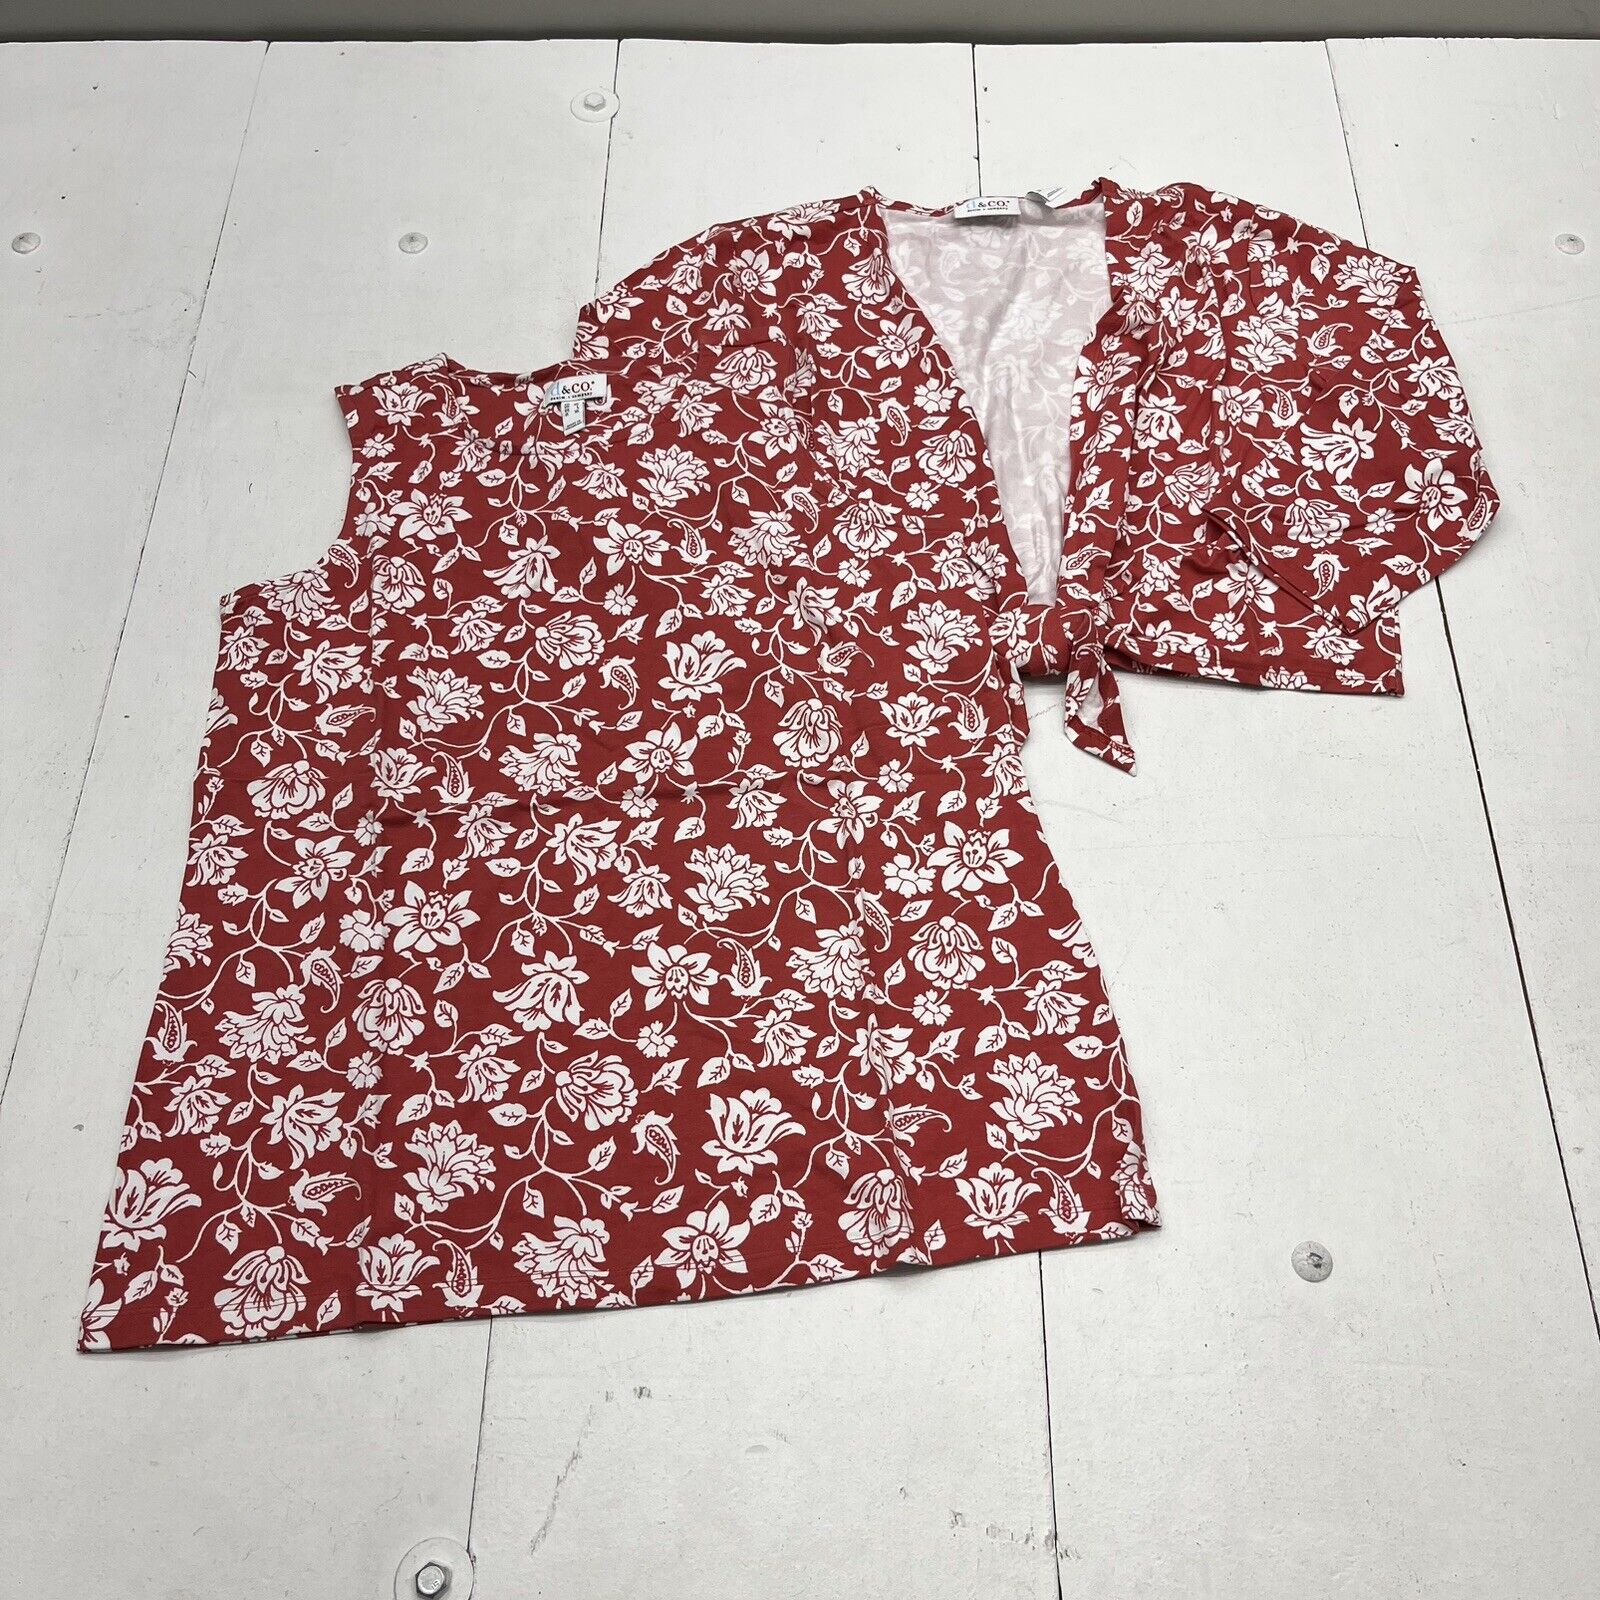 Denim & Co Red Floral Tie Blouse And Tank Top Women’s Size Large NEW